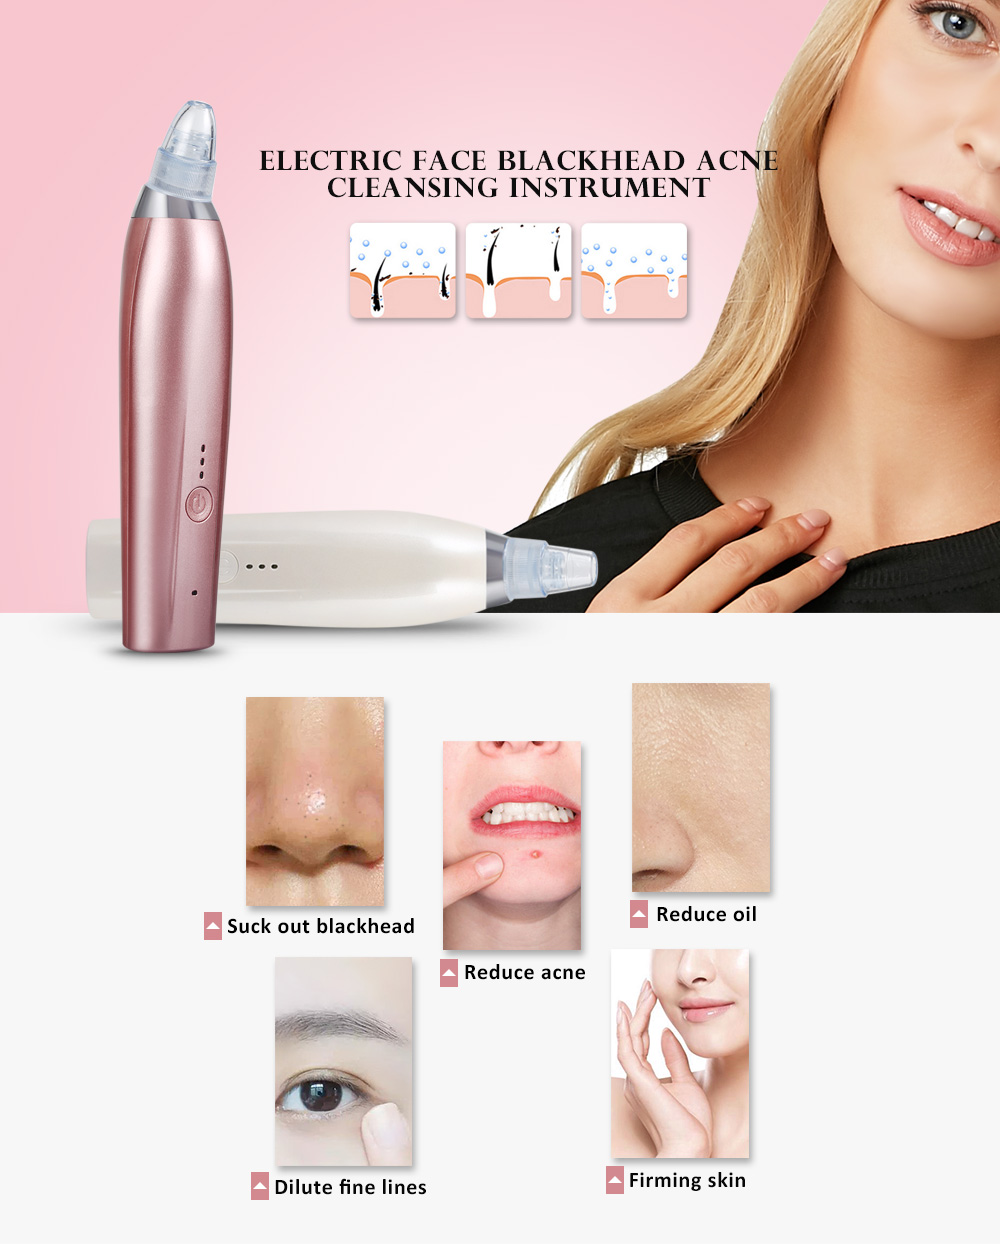 Electric Acne Blackhead Cleansing Instrument